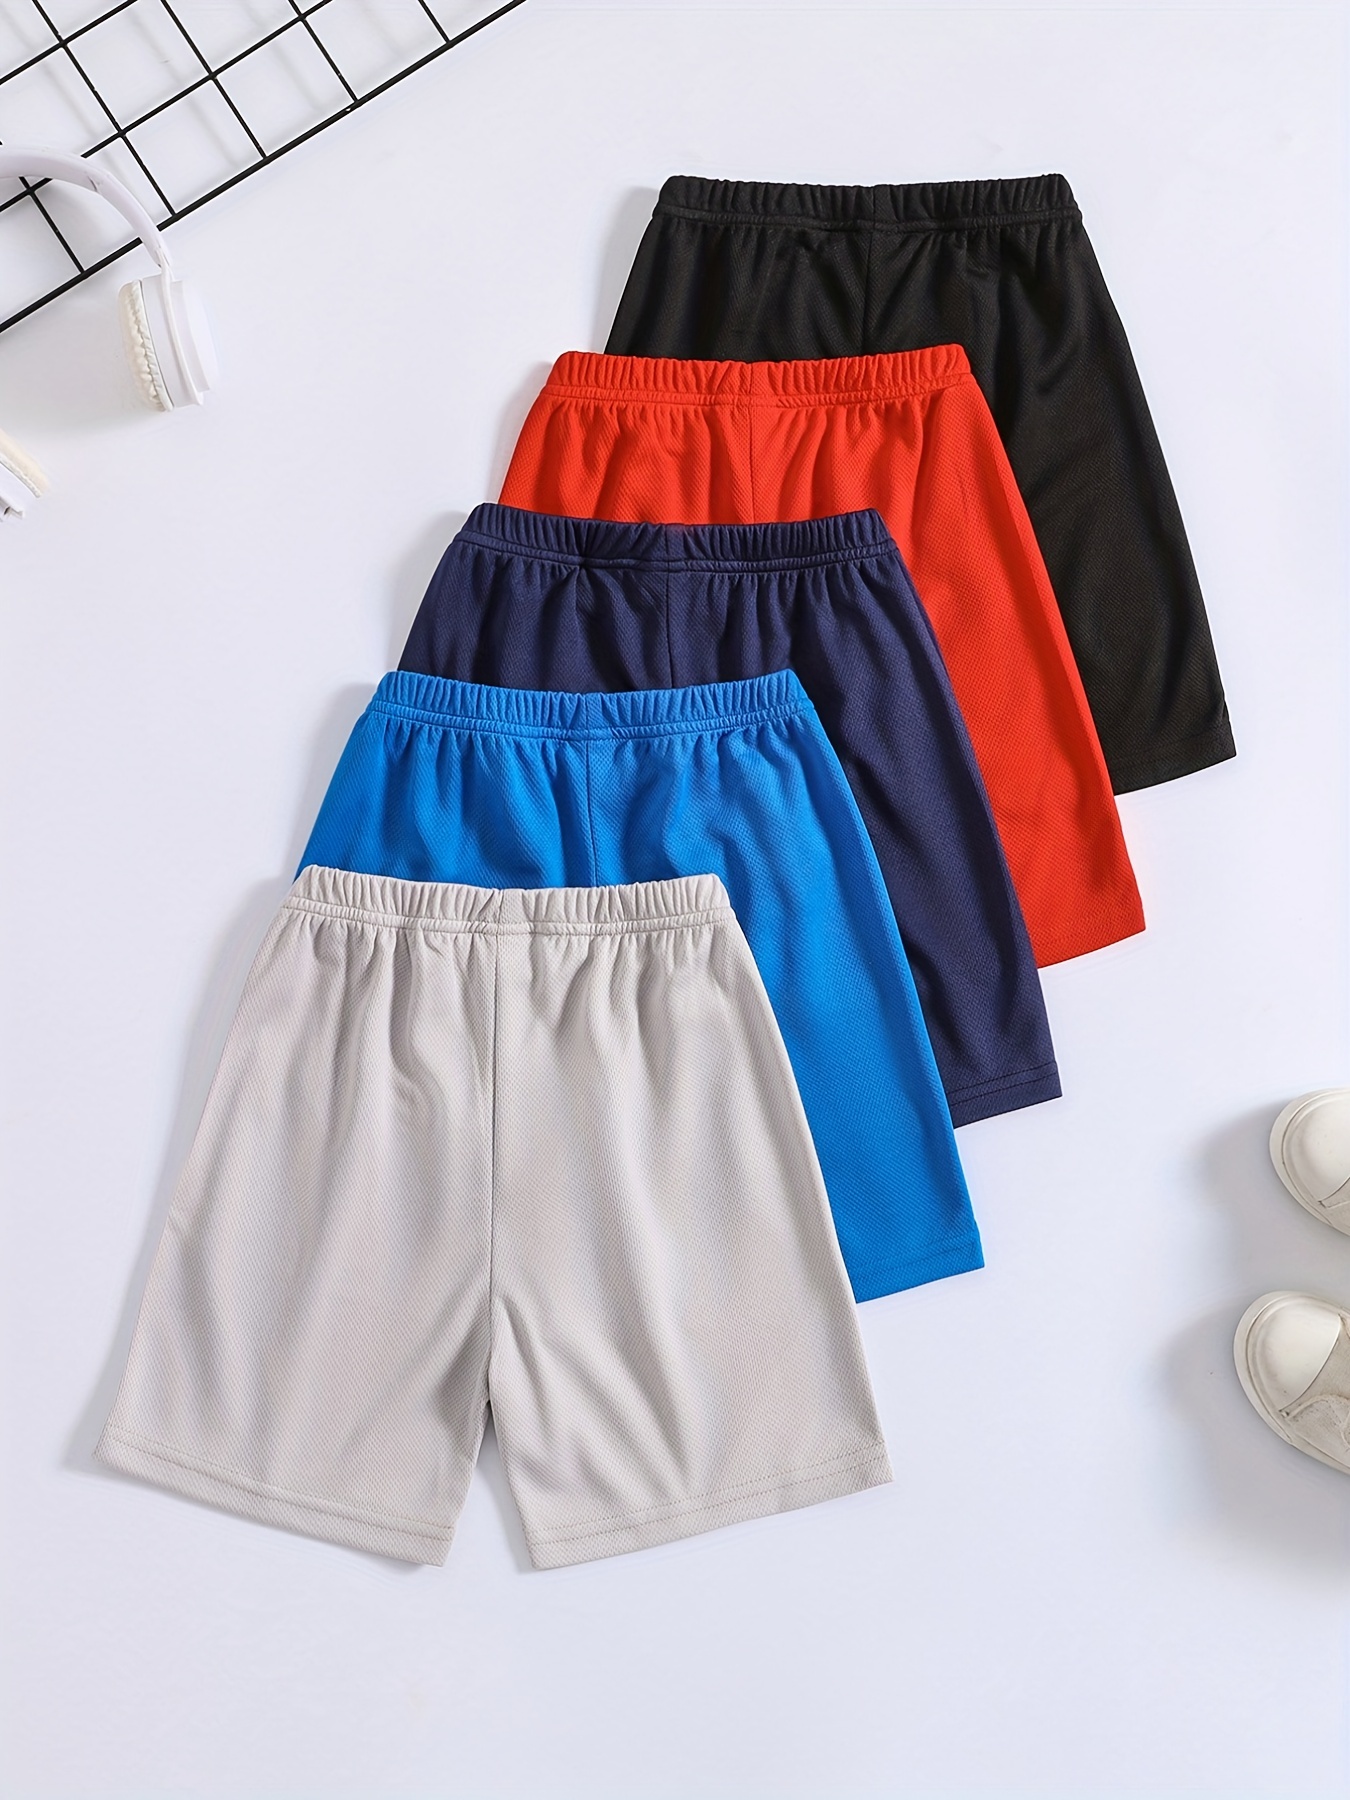 Boys & Girls Mesh Breathable Quick Dry Basketball Shorts, Active